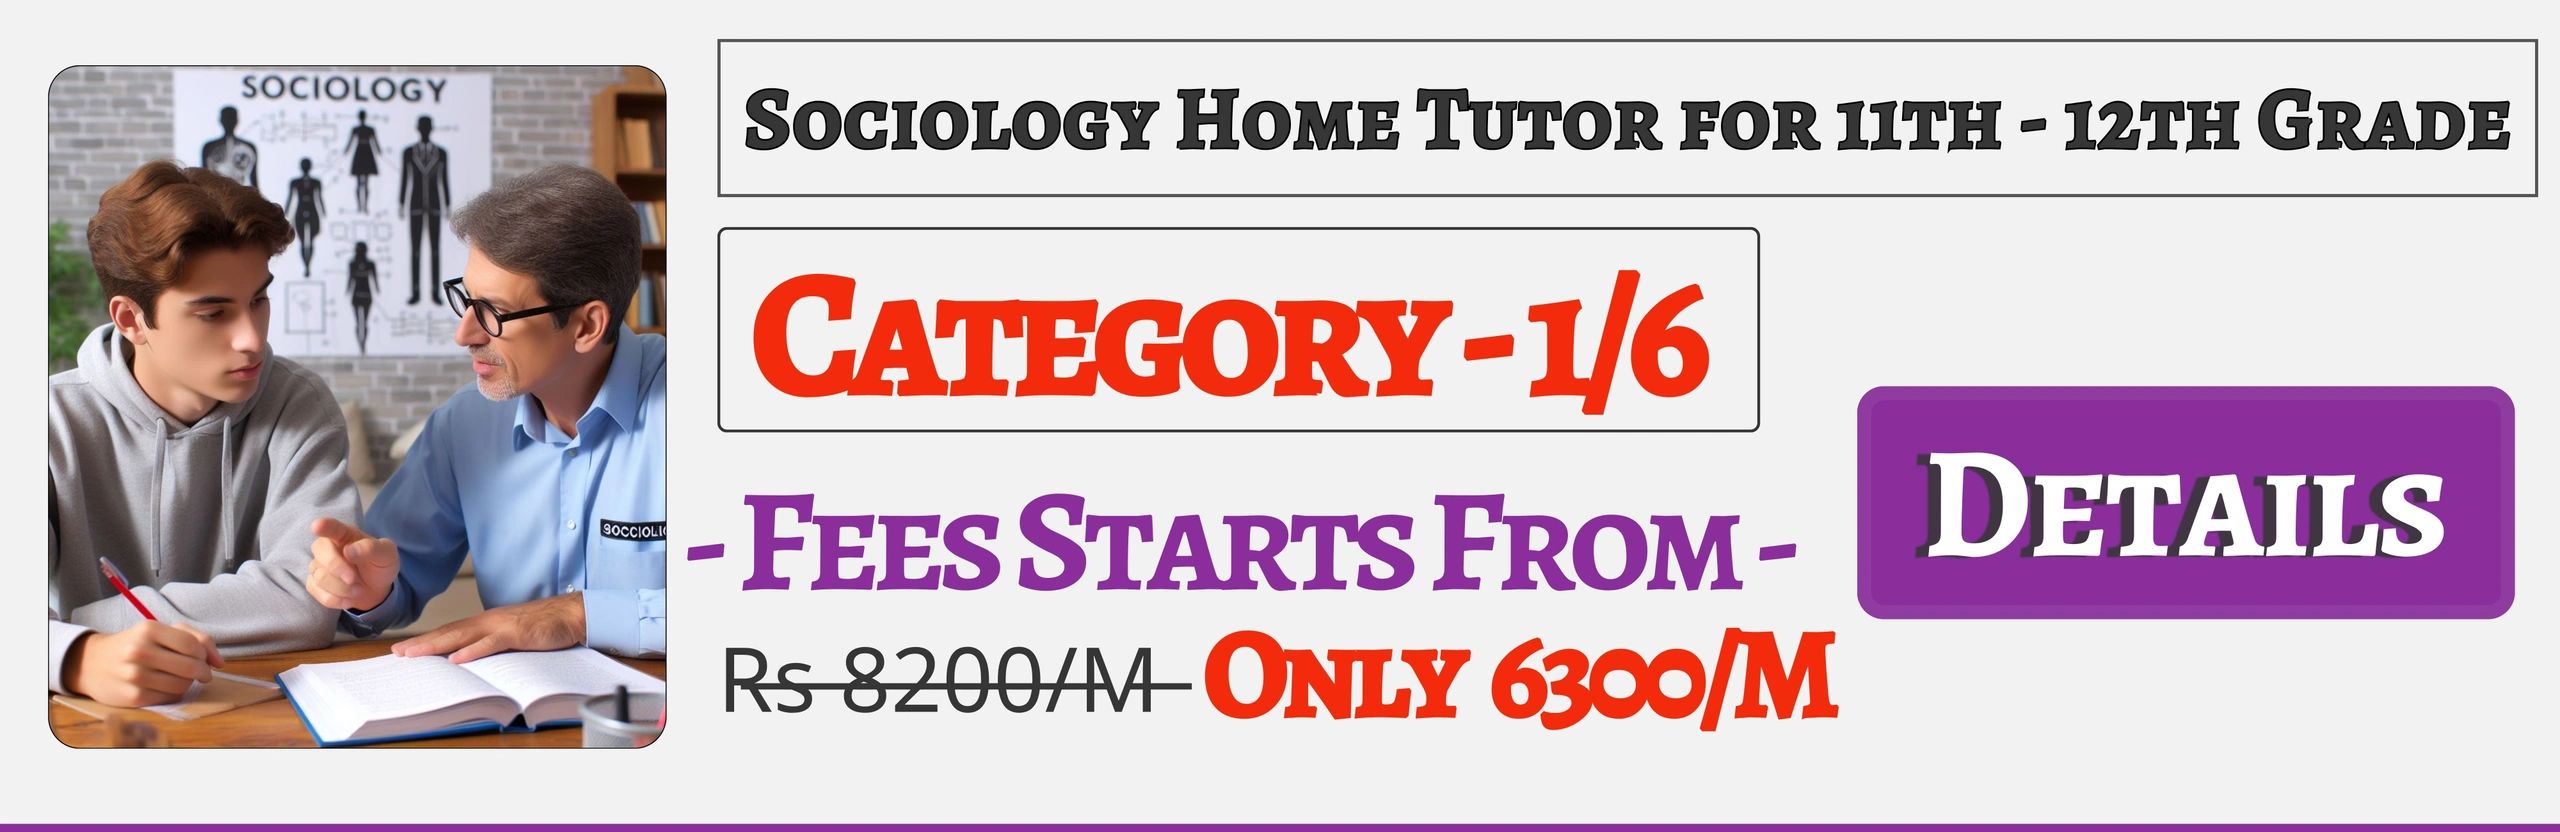 Book Best Nearby Sociology Home Tuition Tutors For 11th & 12th In Jaipur , Fees Only 6300/M